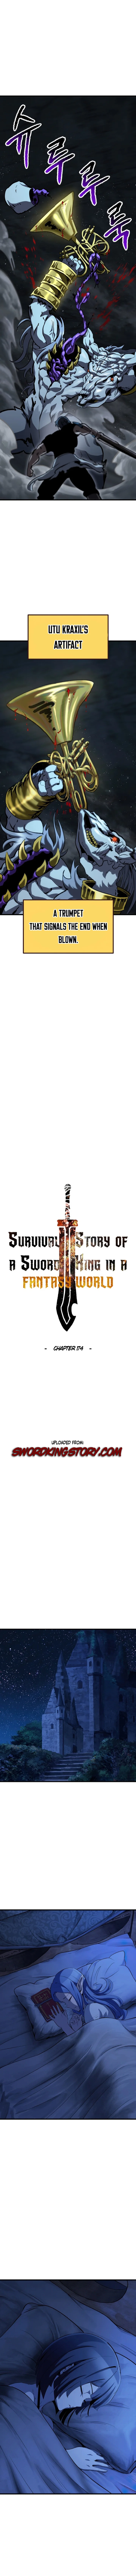 Survival Story of a Sword King in a Fantasy World - Chapter 174 Page 6